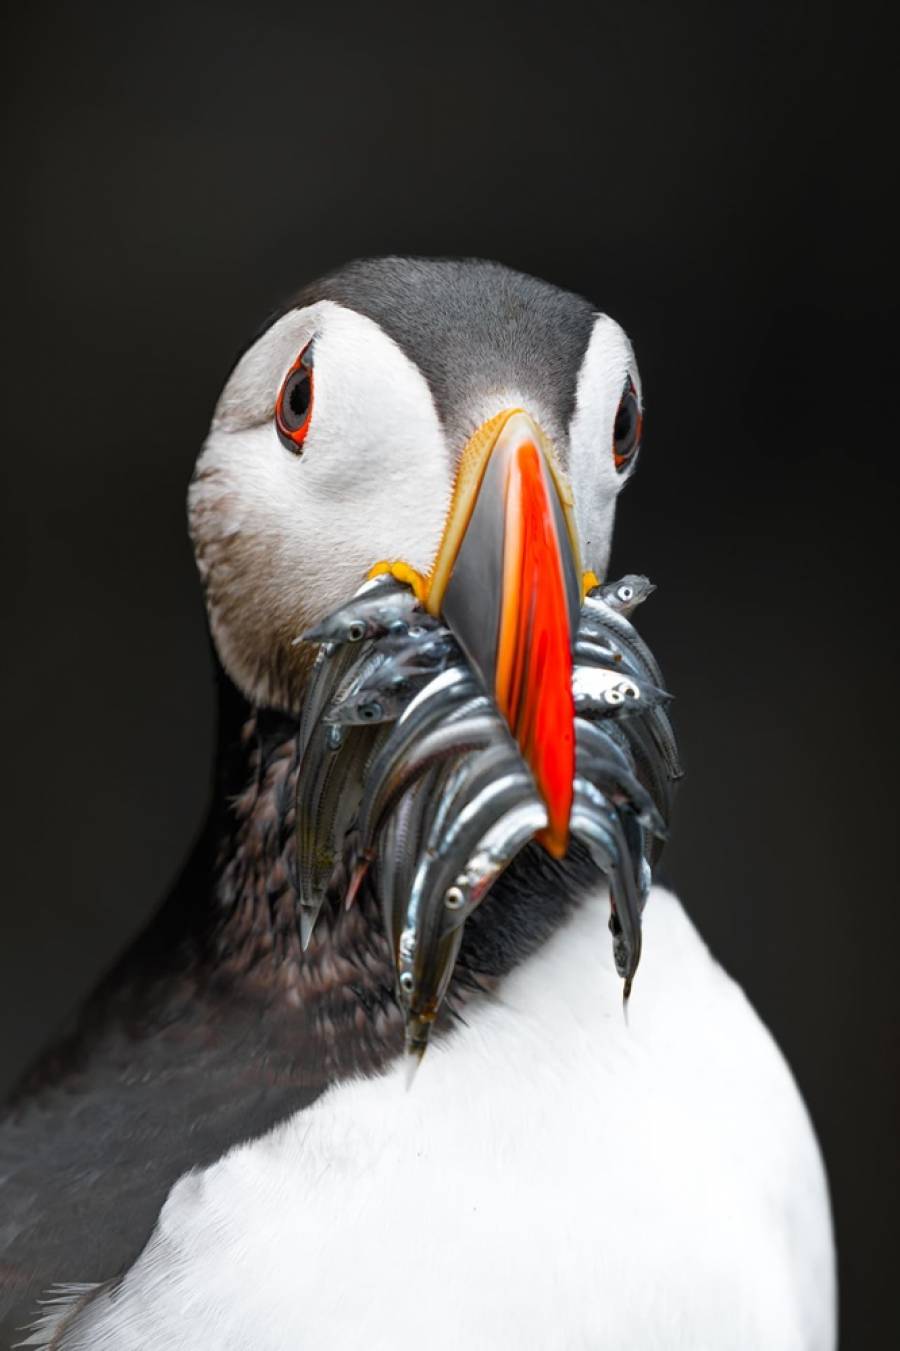 His Majesty the Puffin - Hvalnes, Iceland